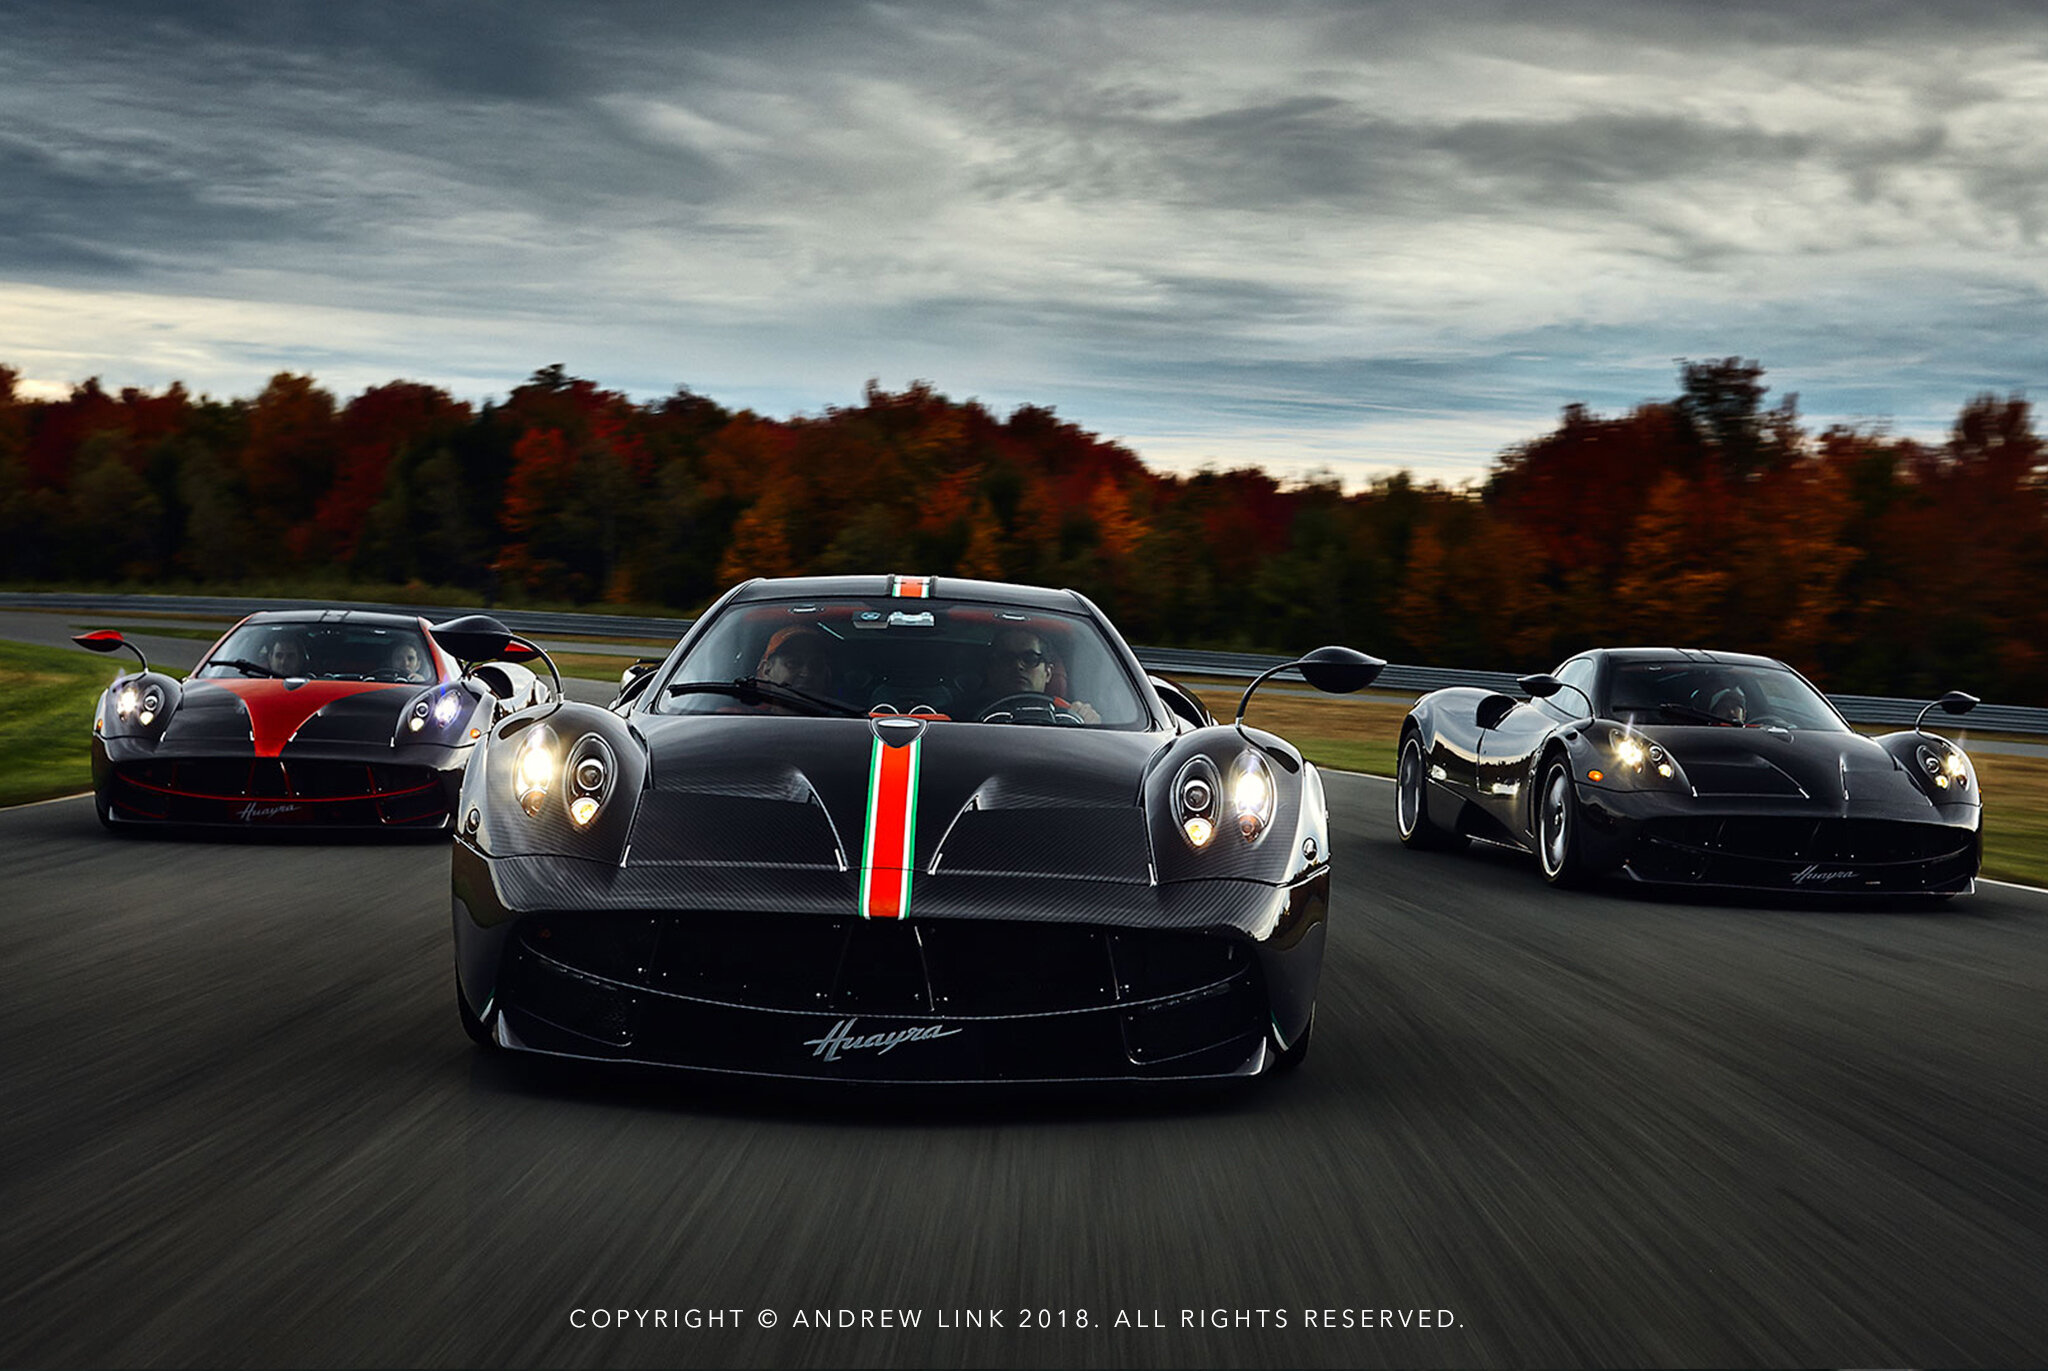 456 New Car group rolling shot wallpaper for Wall poster in bedroom